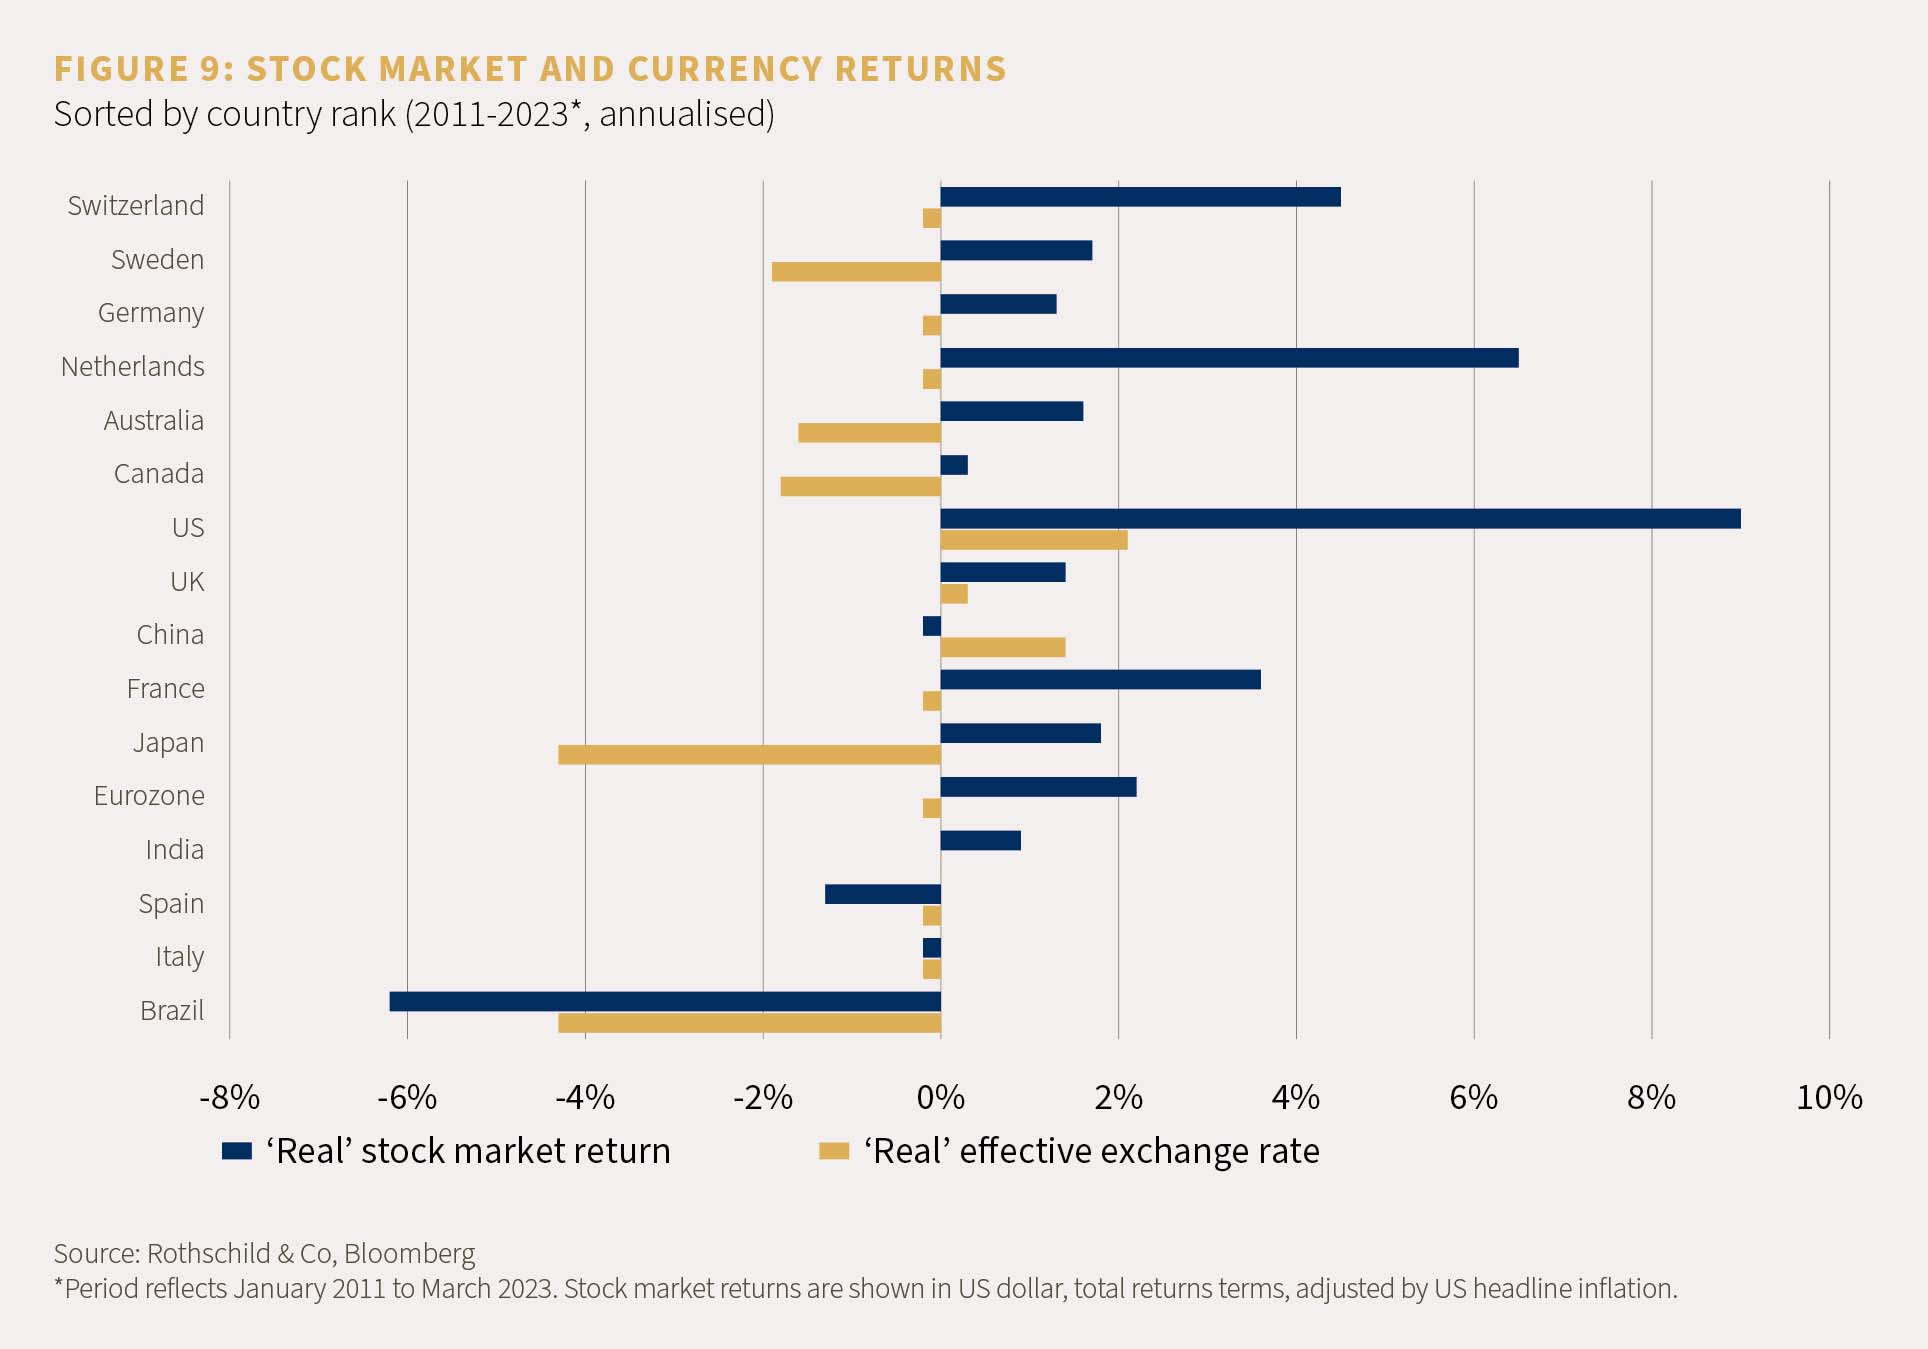 Chart showing stock market and currency returns